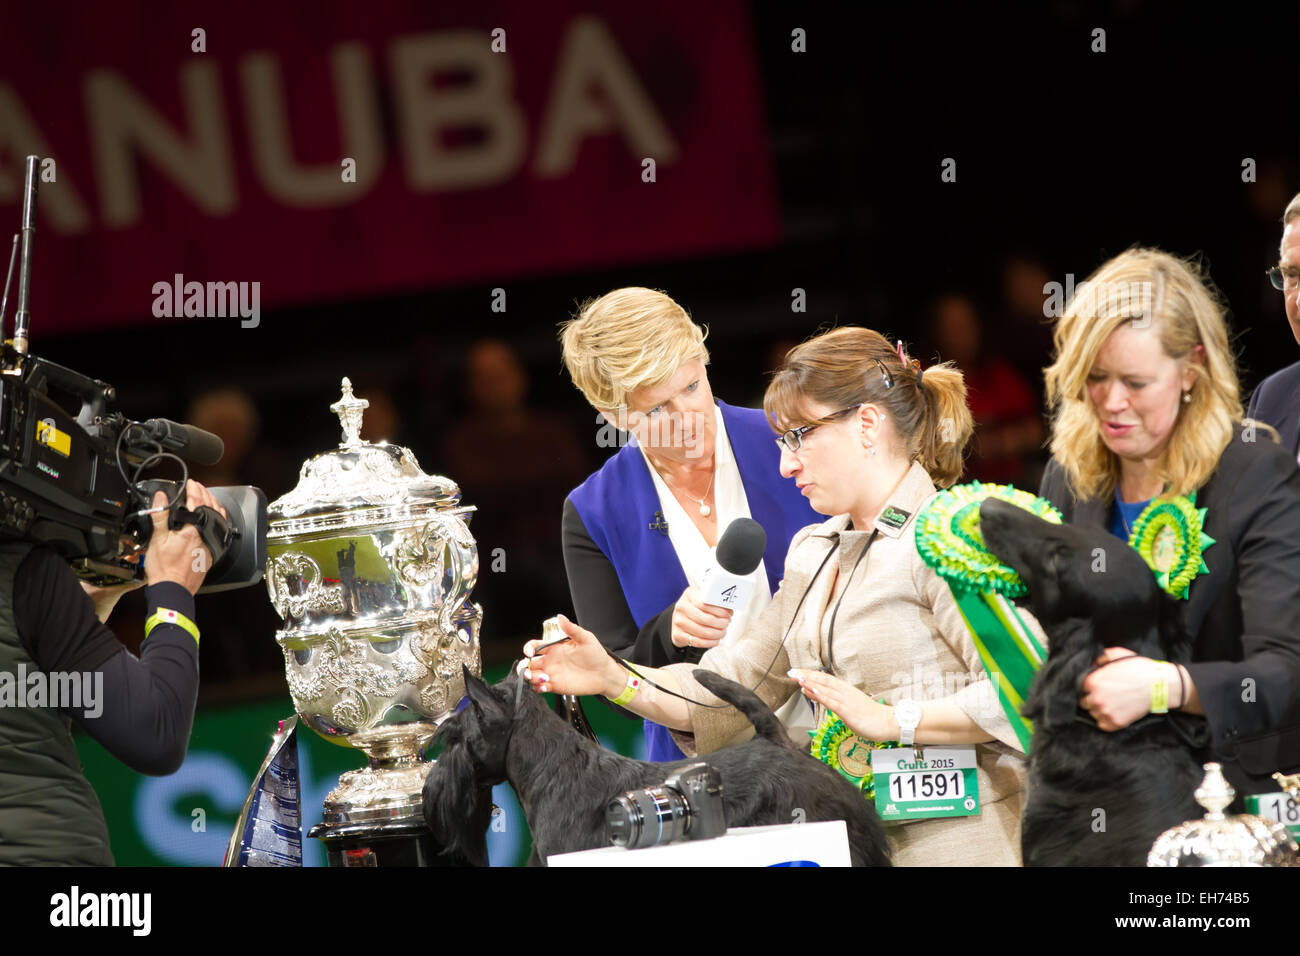 Birmingham, UK. 08th Mar, 2015. Crufts Best in show winner 2015 at the NEC in Birmingham. Knopa the Scottish Terrier and runner up Dublin still holding the rosette. Credit:  steven roe/Alamy Live News Stock Photo